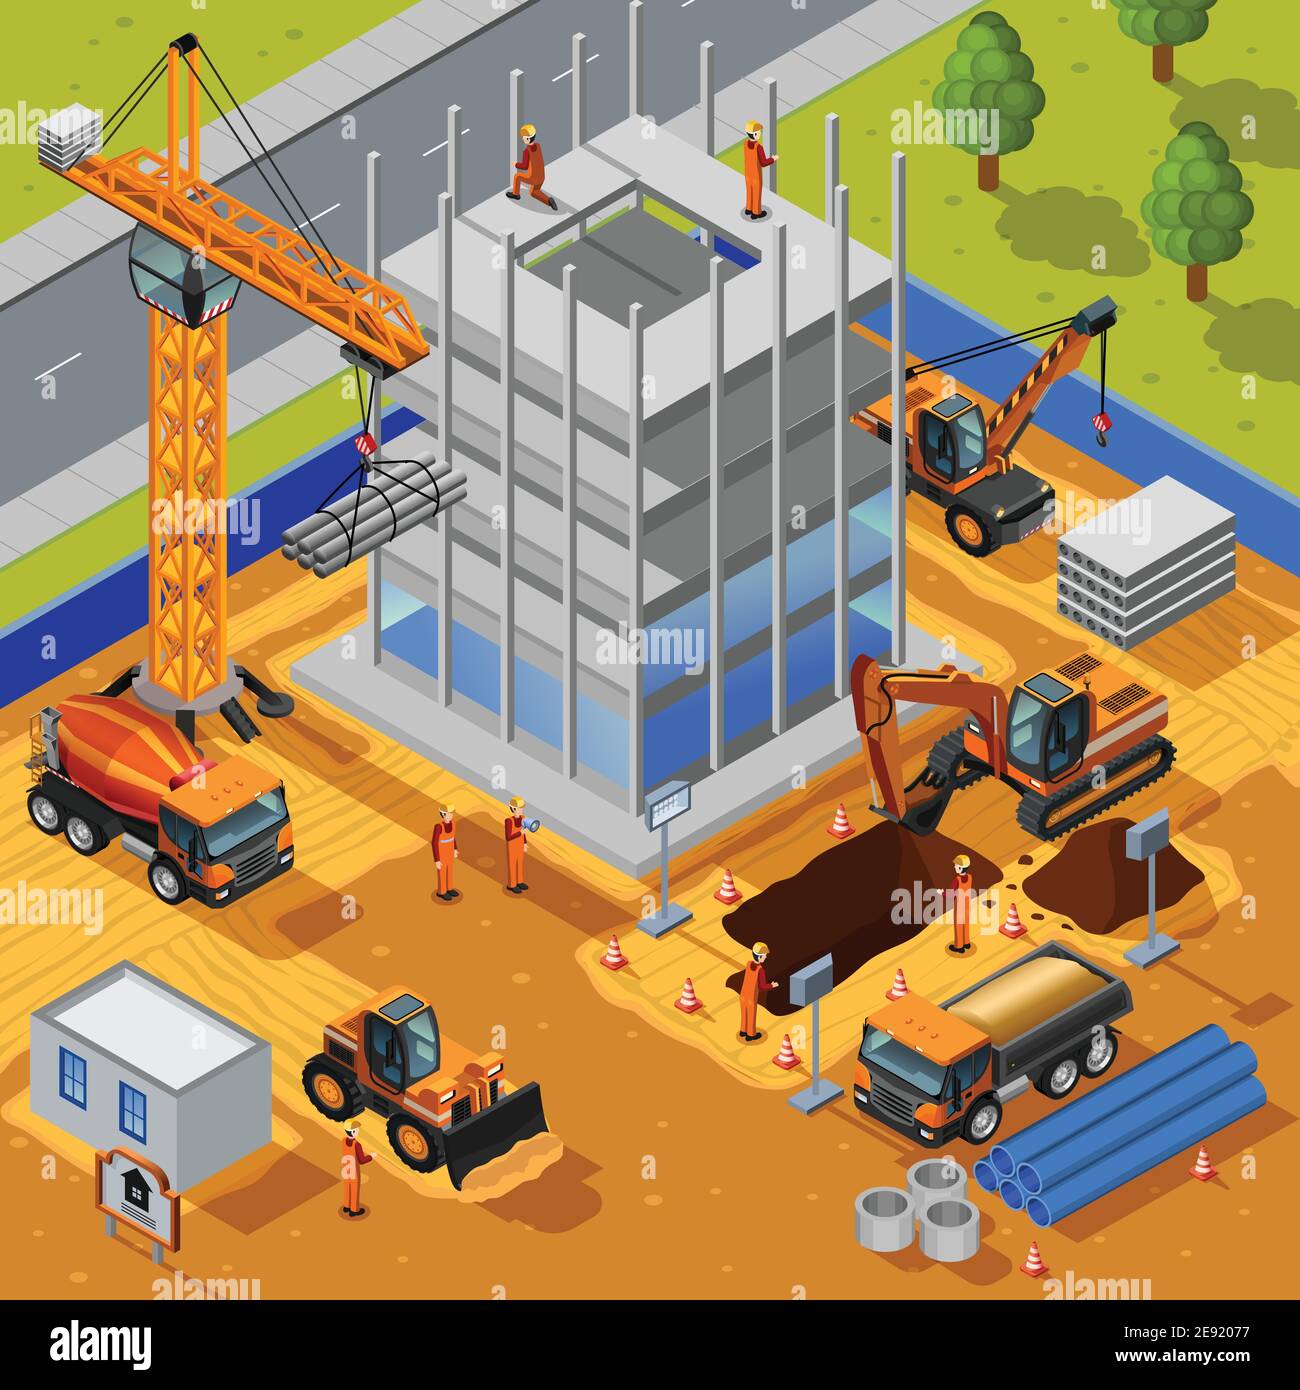 Construction of multistory building isometric design concept with crane bulldozer workers pipes concrete slabs flat vector illustration Stock Vector